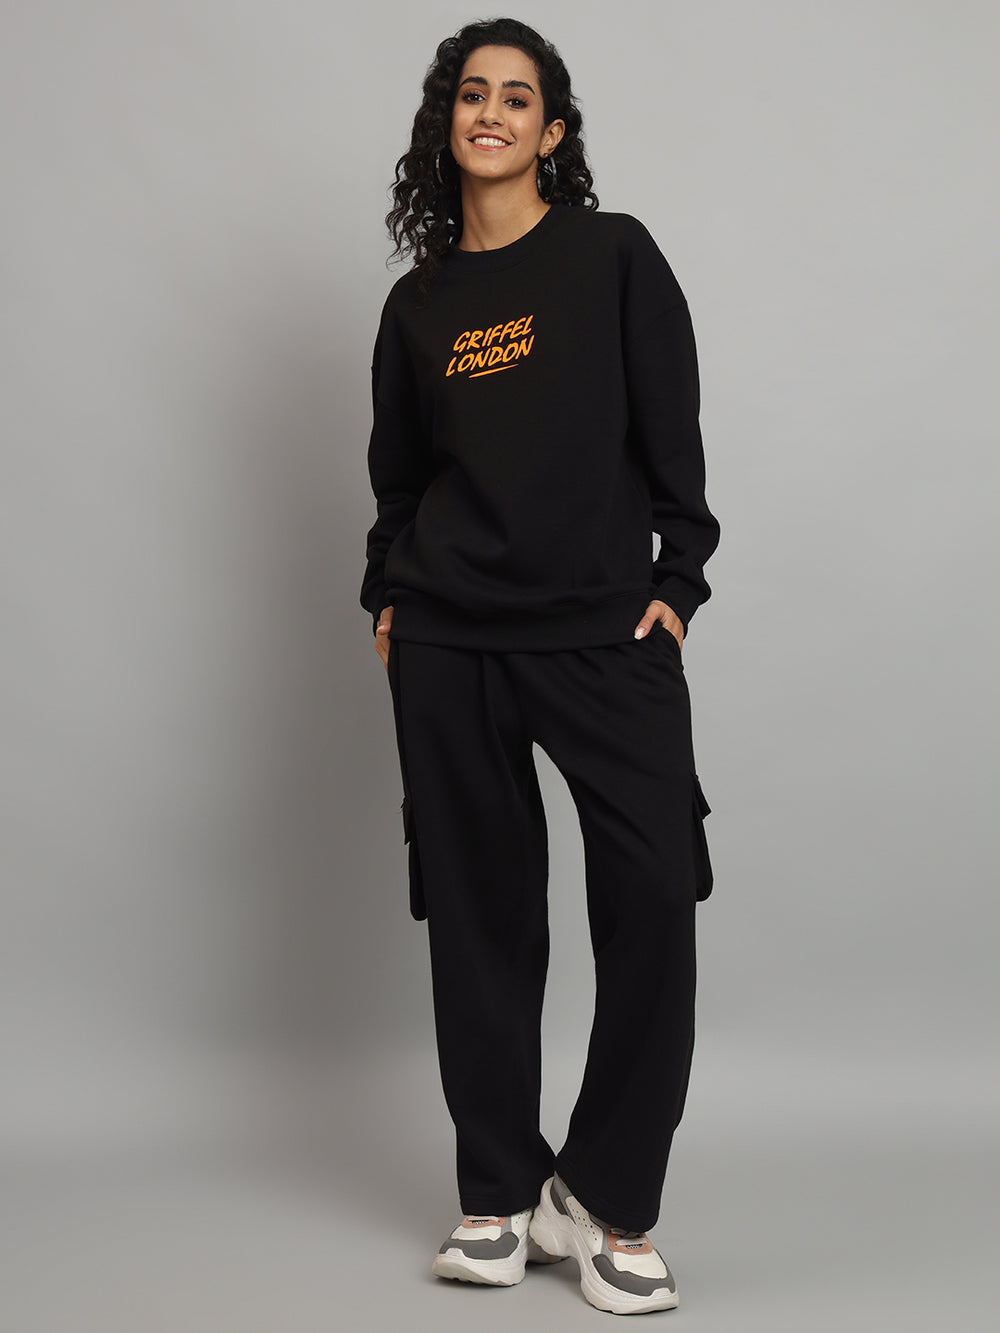 Griffel Women Oversized WHO ARE YOU TO JUDGE Print Fit Basic Round Neck 100% Cotton Fleece Black Tracksuit - griffel